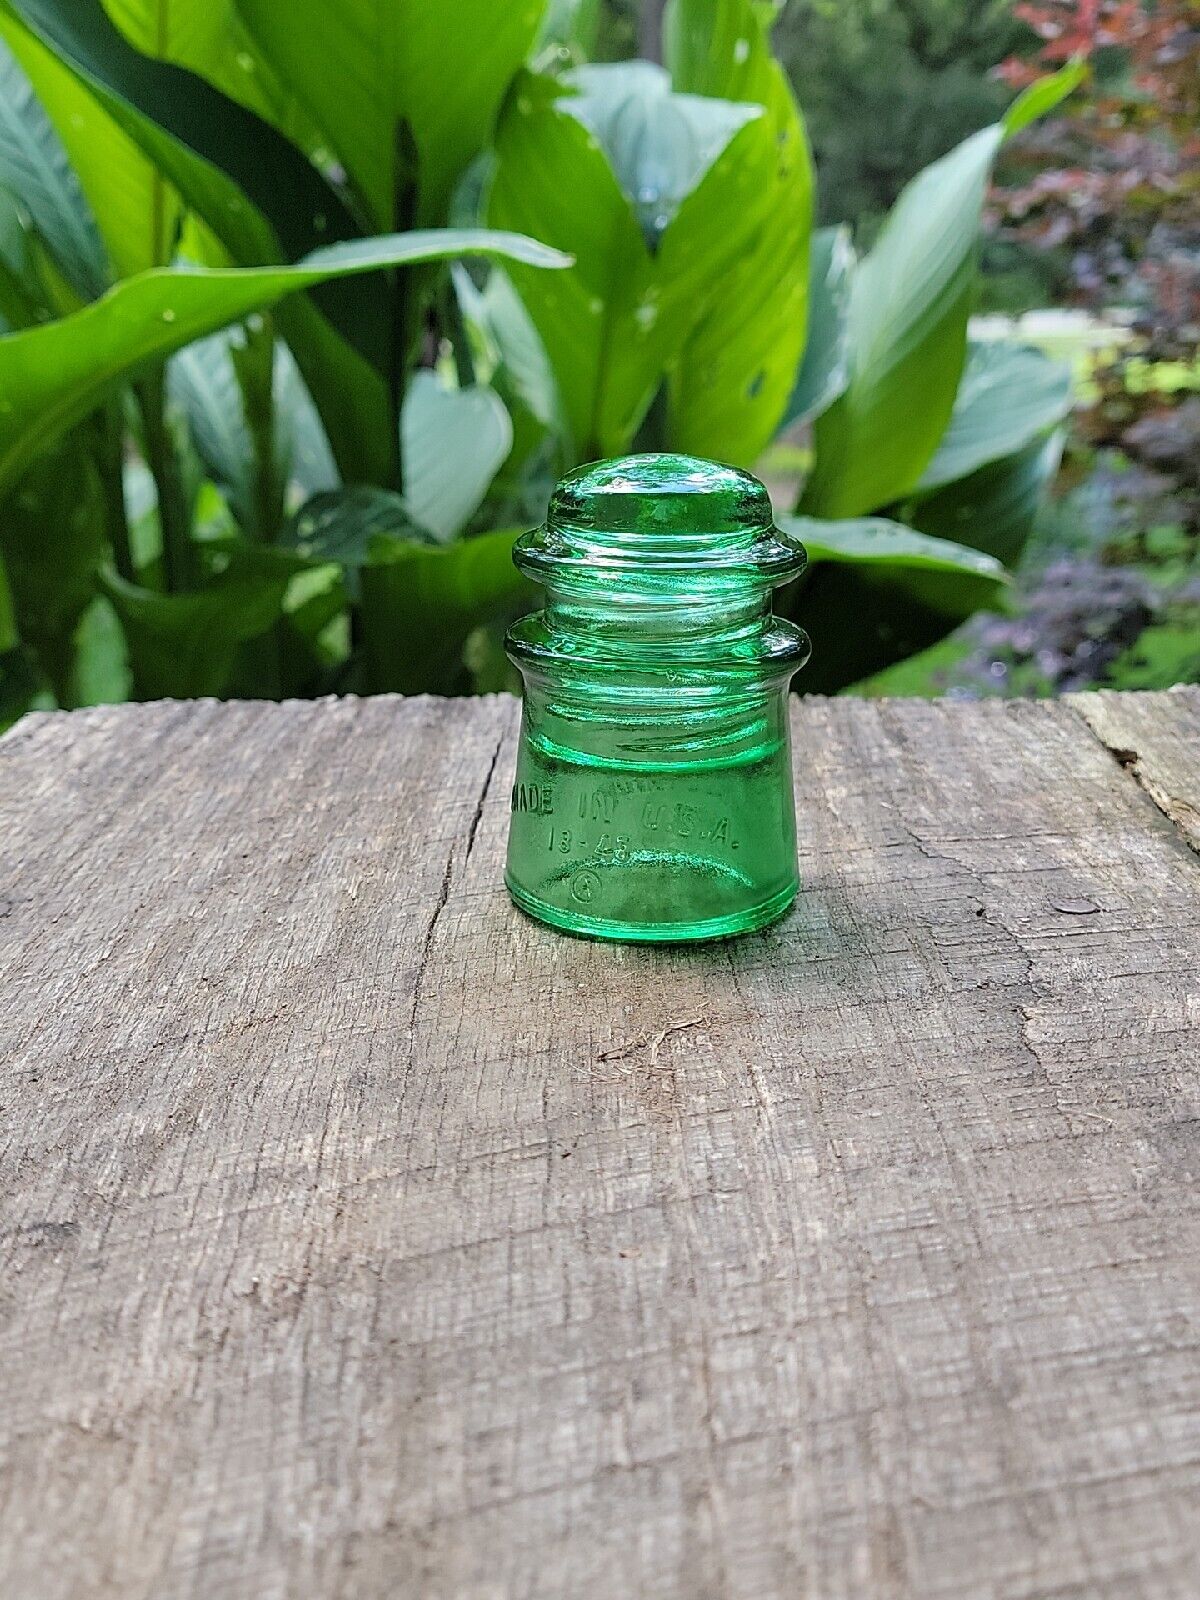 Vintage Glass Insulator Green Whitall Tatum #9 Stained Decorative Antique Glass 